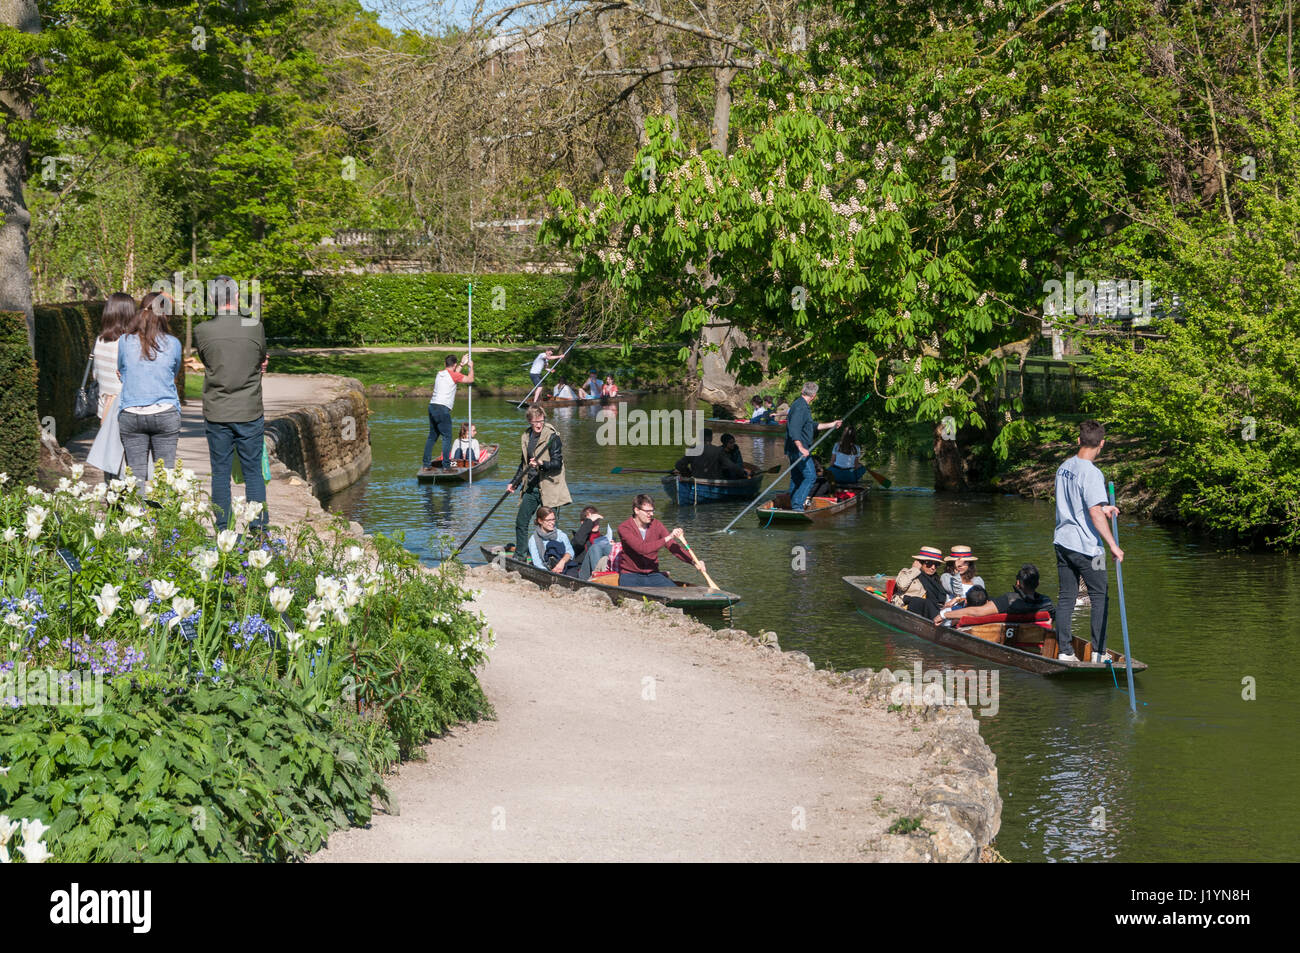 Oxford, Oxfordshire, UK. 22nd Apr, 2017. UK Weather, Oxford, Oxfordshire, UK. 22nd April 2017, People enjoy sunny day in the Oxford Botanic Garden and punting on the River Cherwell Credit: Stanislav Halcin/Alamy Live News Stock Photo